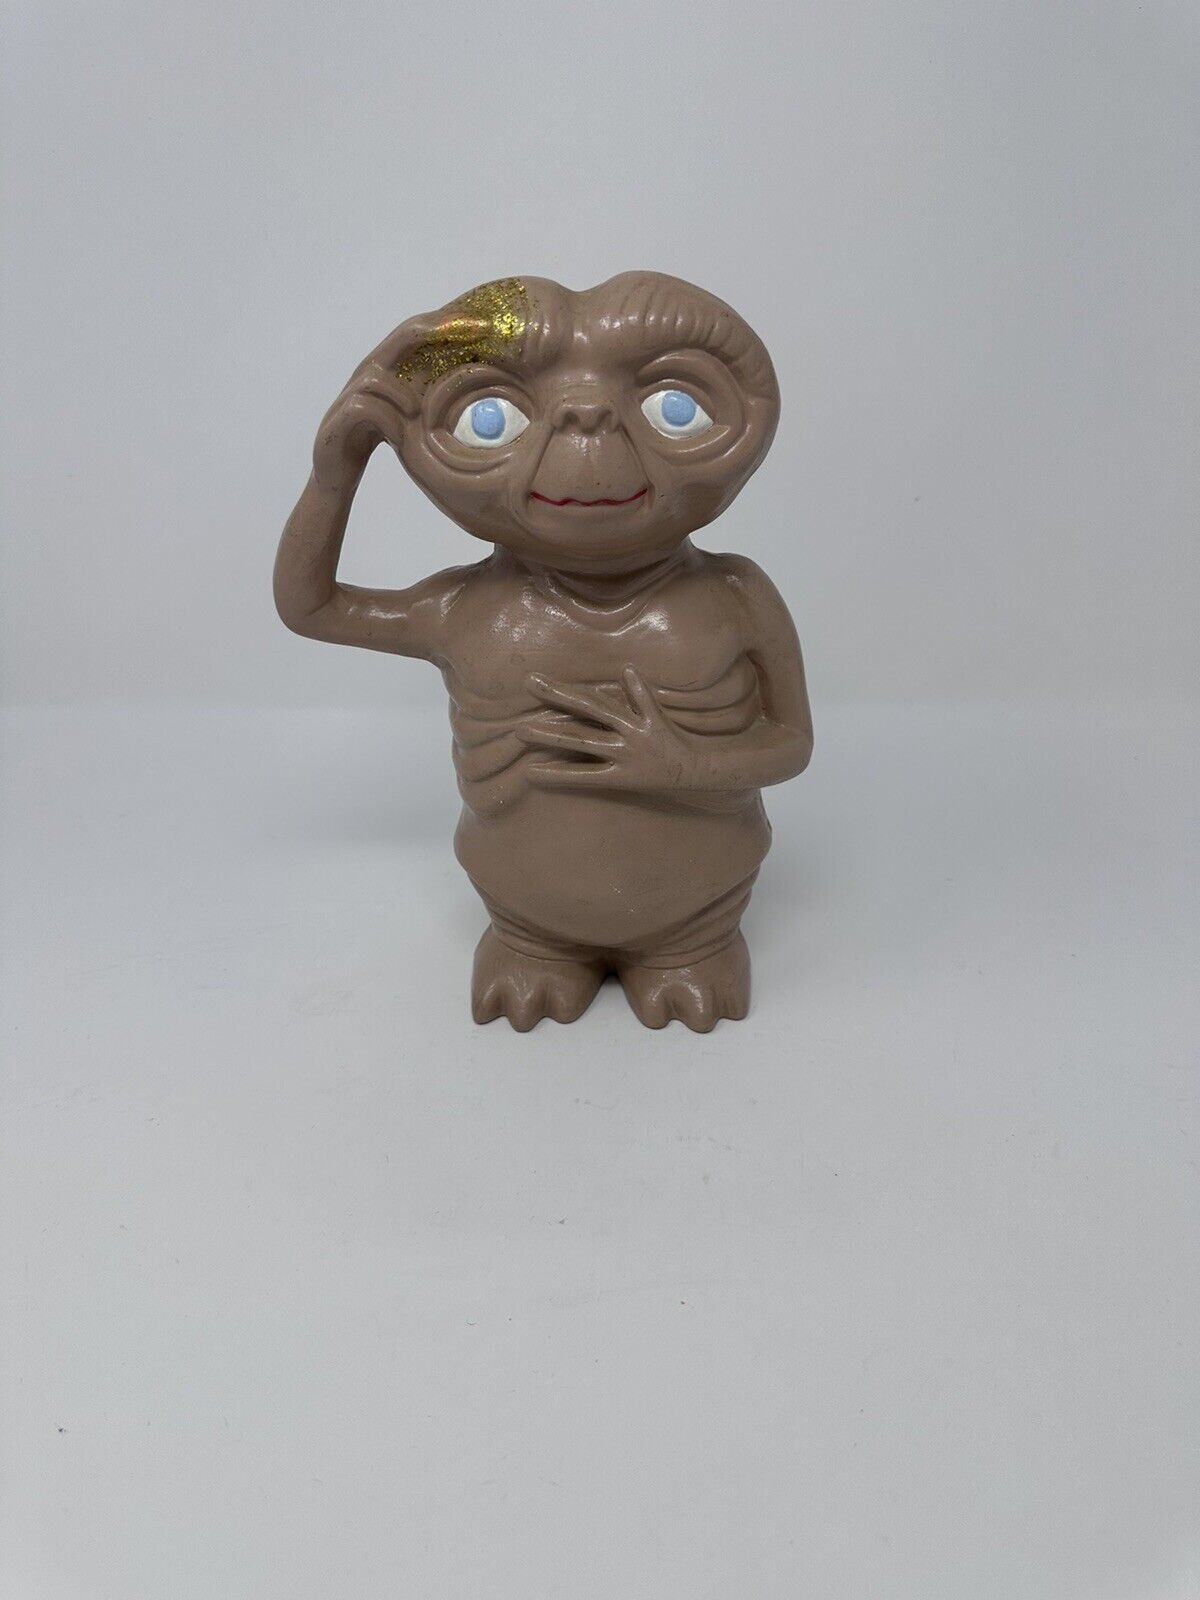 Vintage E.T. The Extra Terrestrial Ceramic Statue 1980s Coin Piggy Bank Read